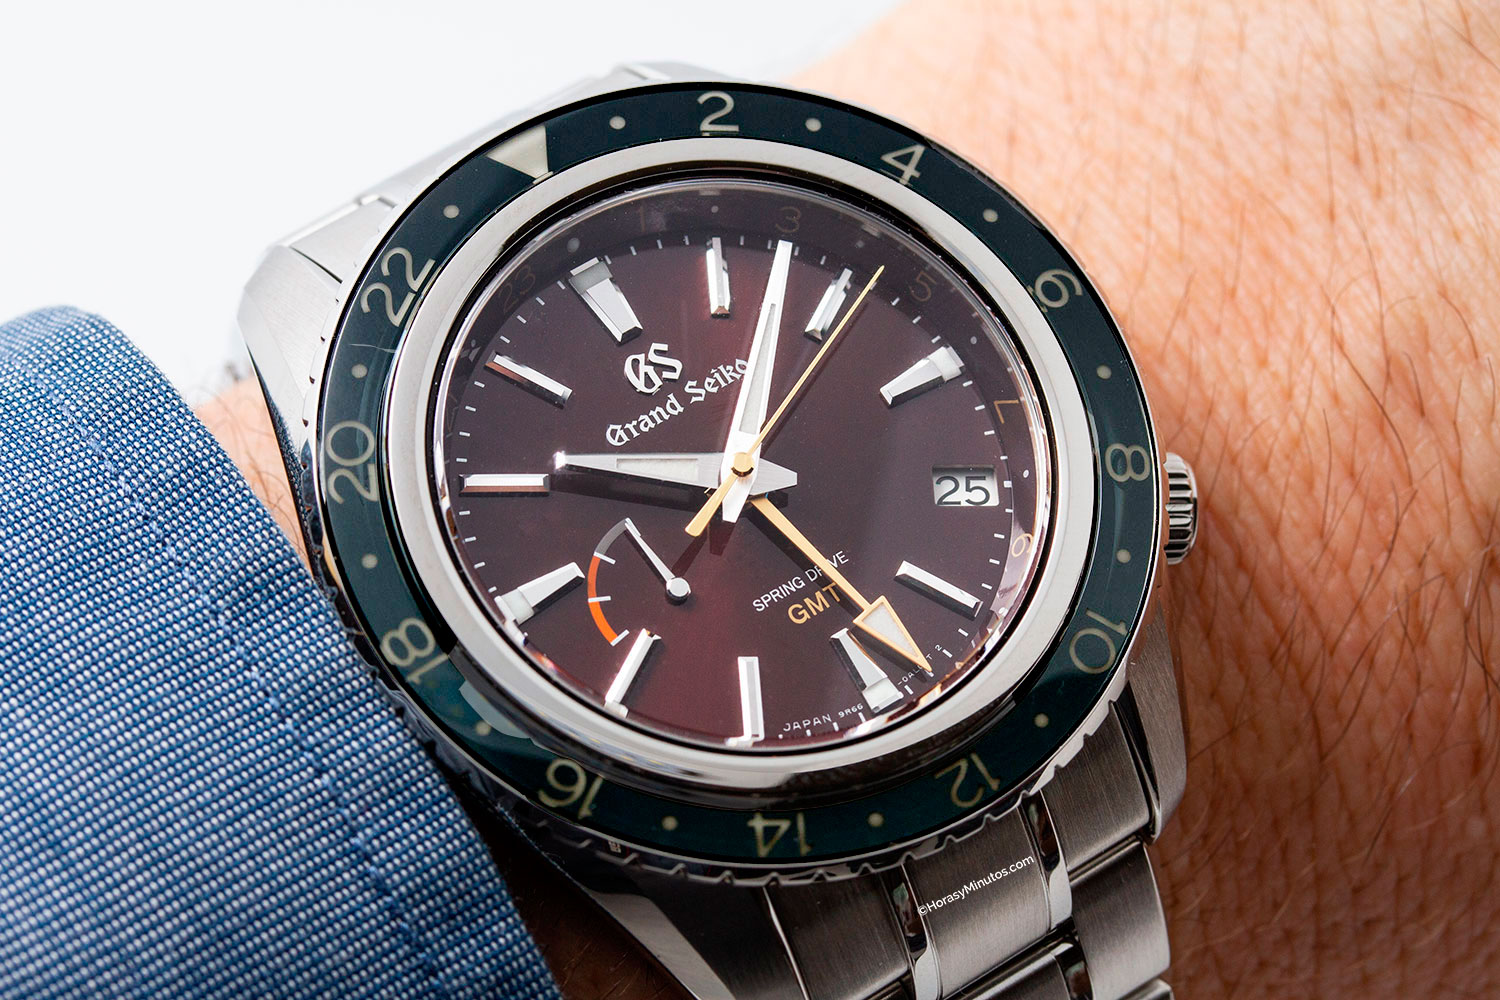 Grand Seiko Sport Spring Drive GMT Limited Edition